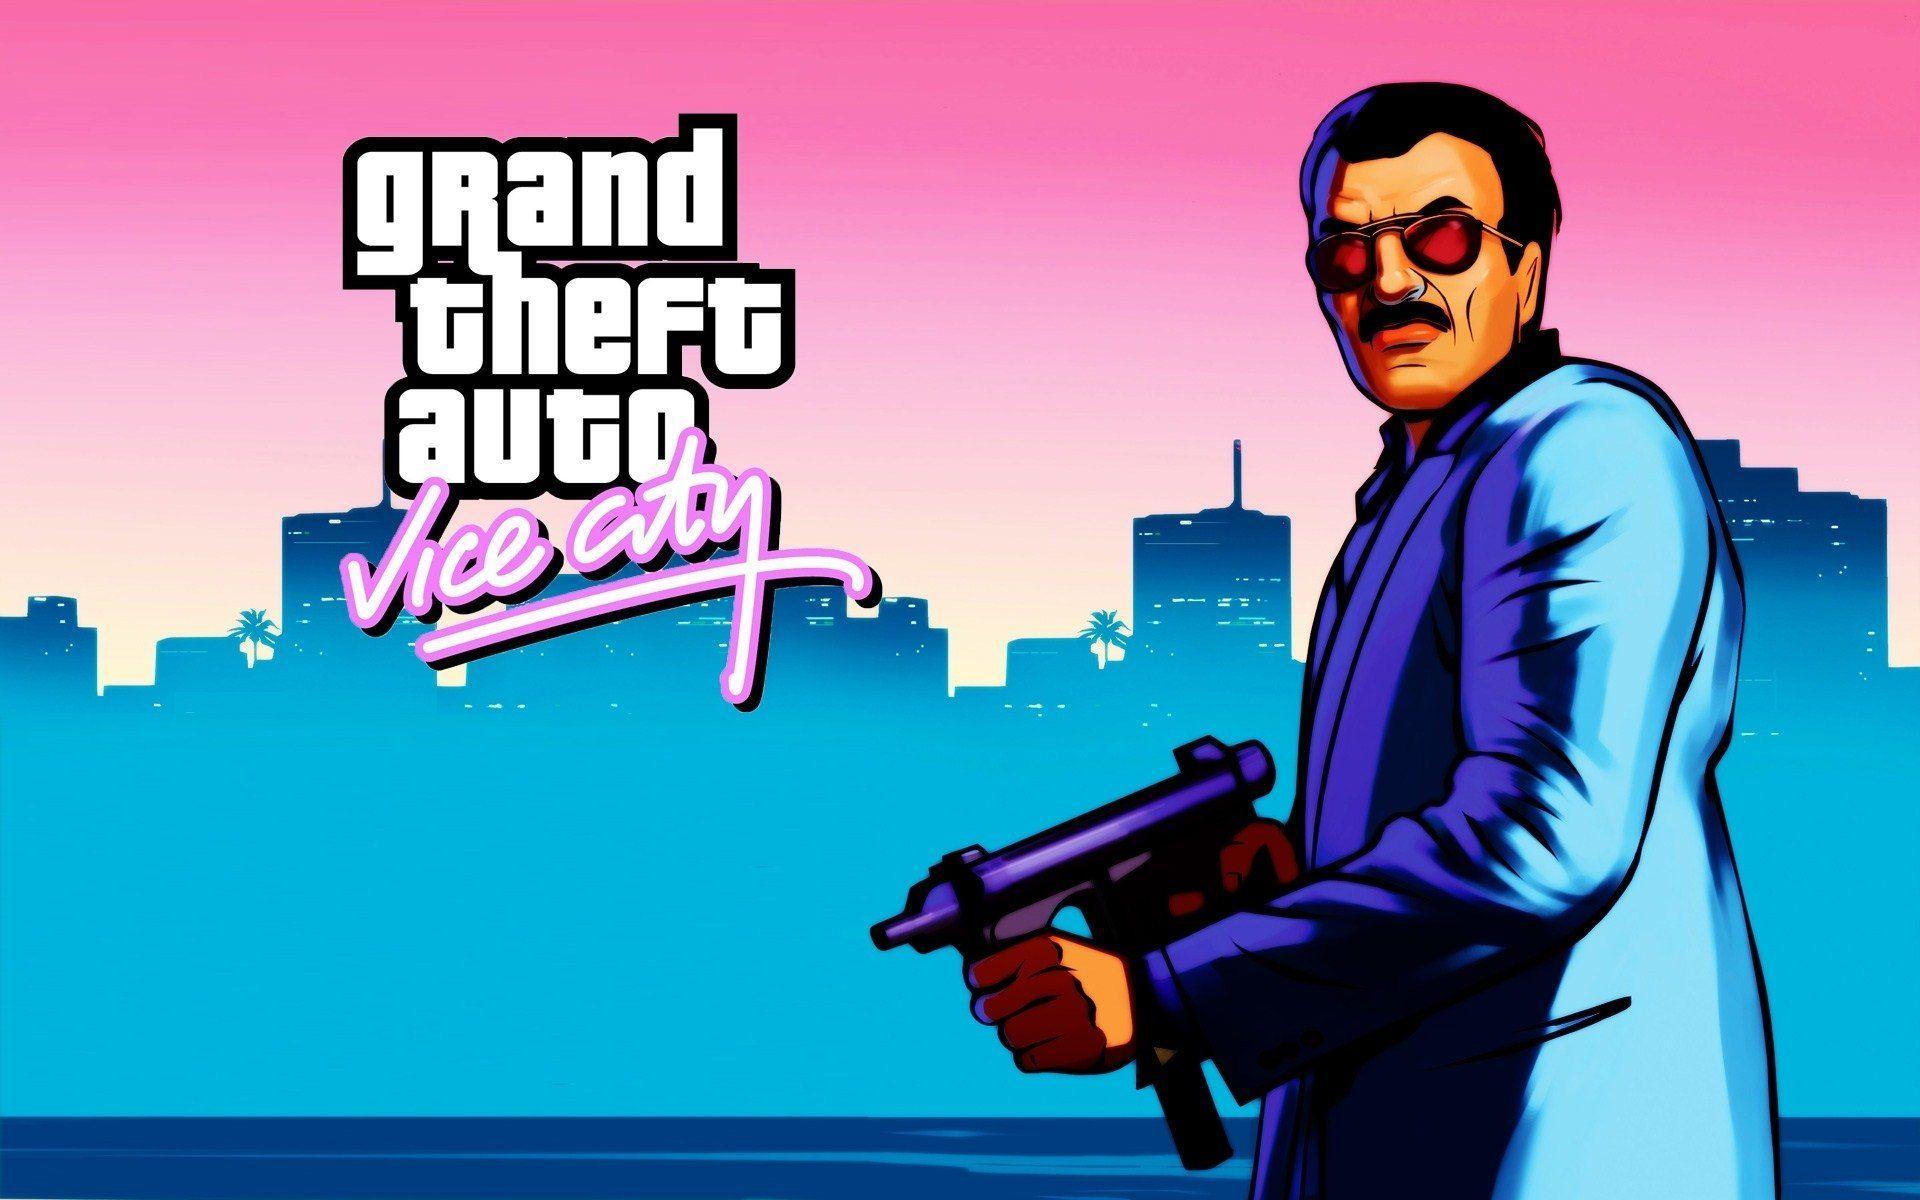 Grand Theft Auto Vice City 2K Wallpapers